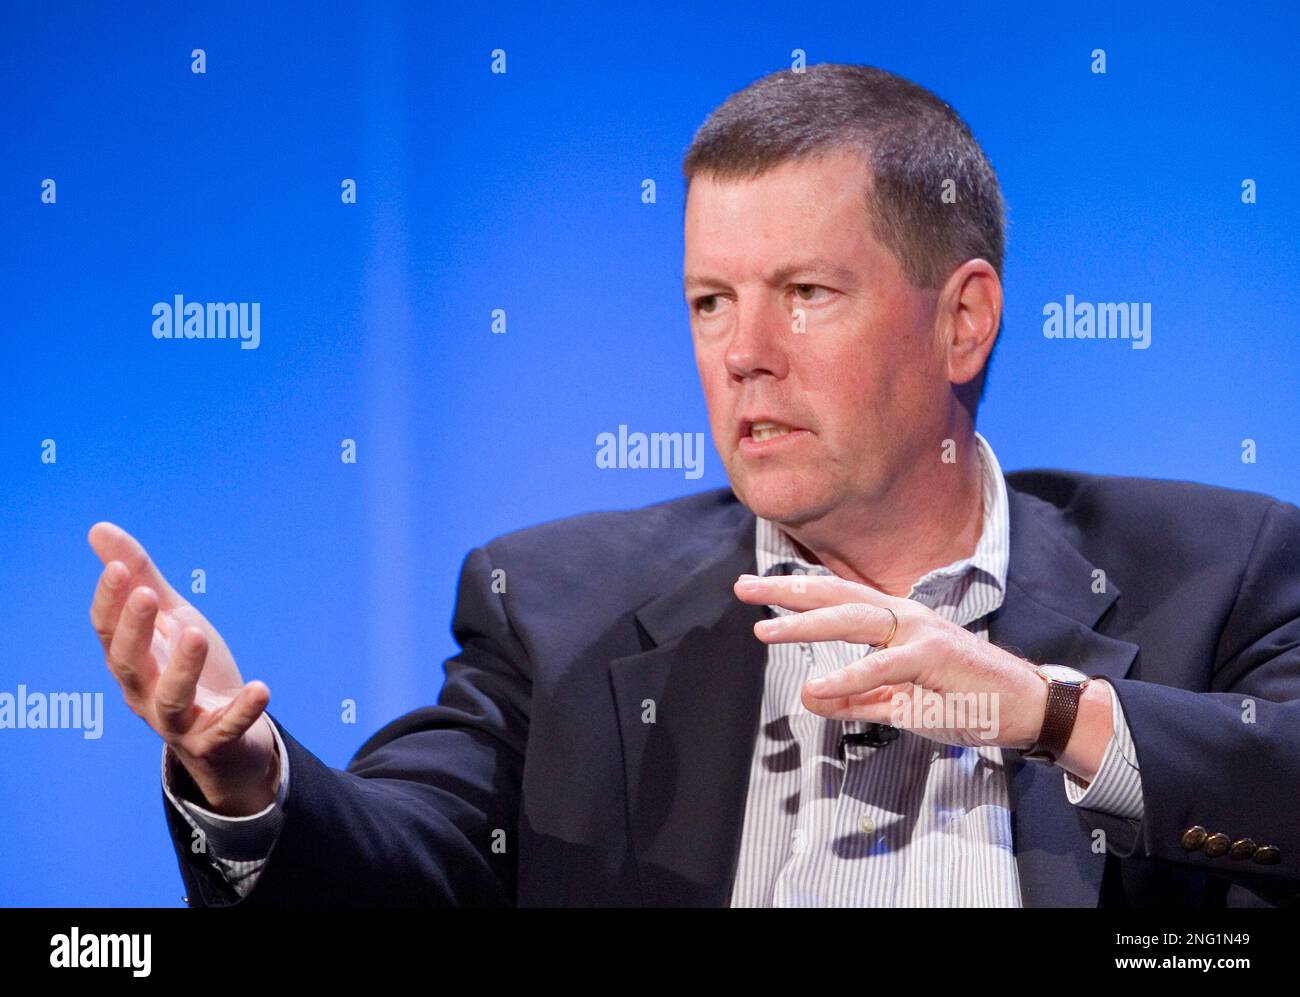 Scott McNealy, the Chairman and Co-Founder of Sun Microsystems, speaks at the World Business Forum on Thursday, Oct. 11, 2007 in New York. (AP Photo/Mark Lennihan) Stock Photo